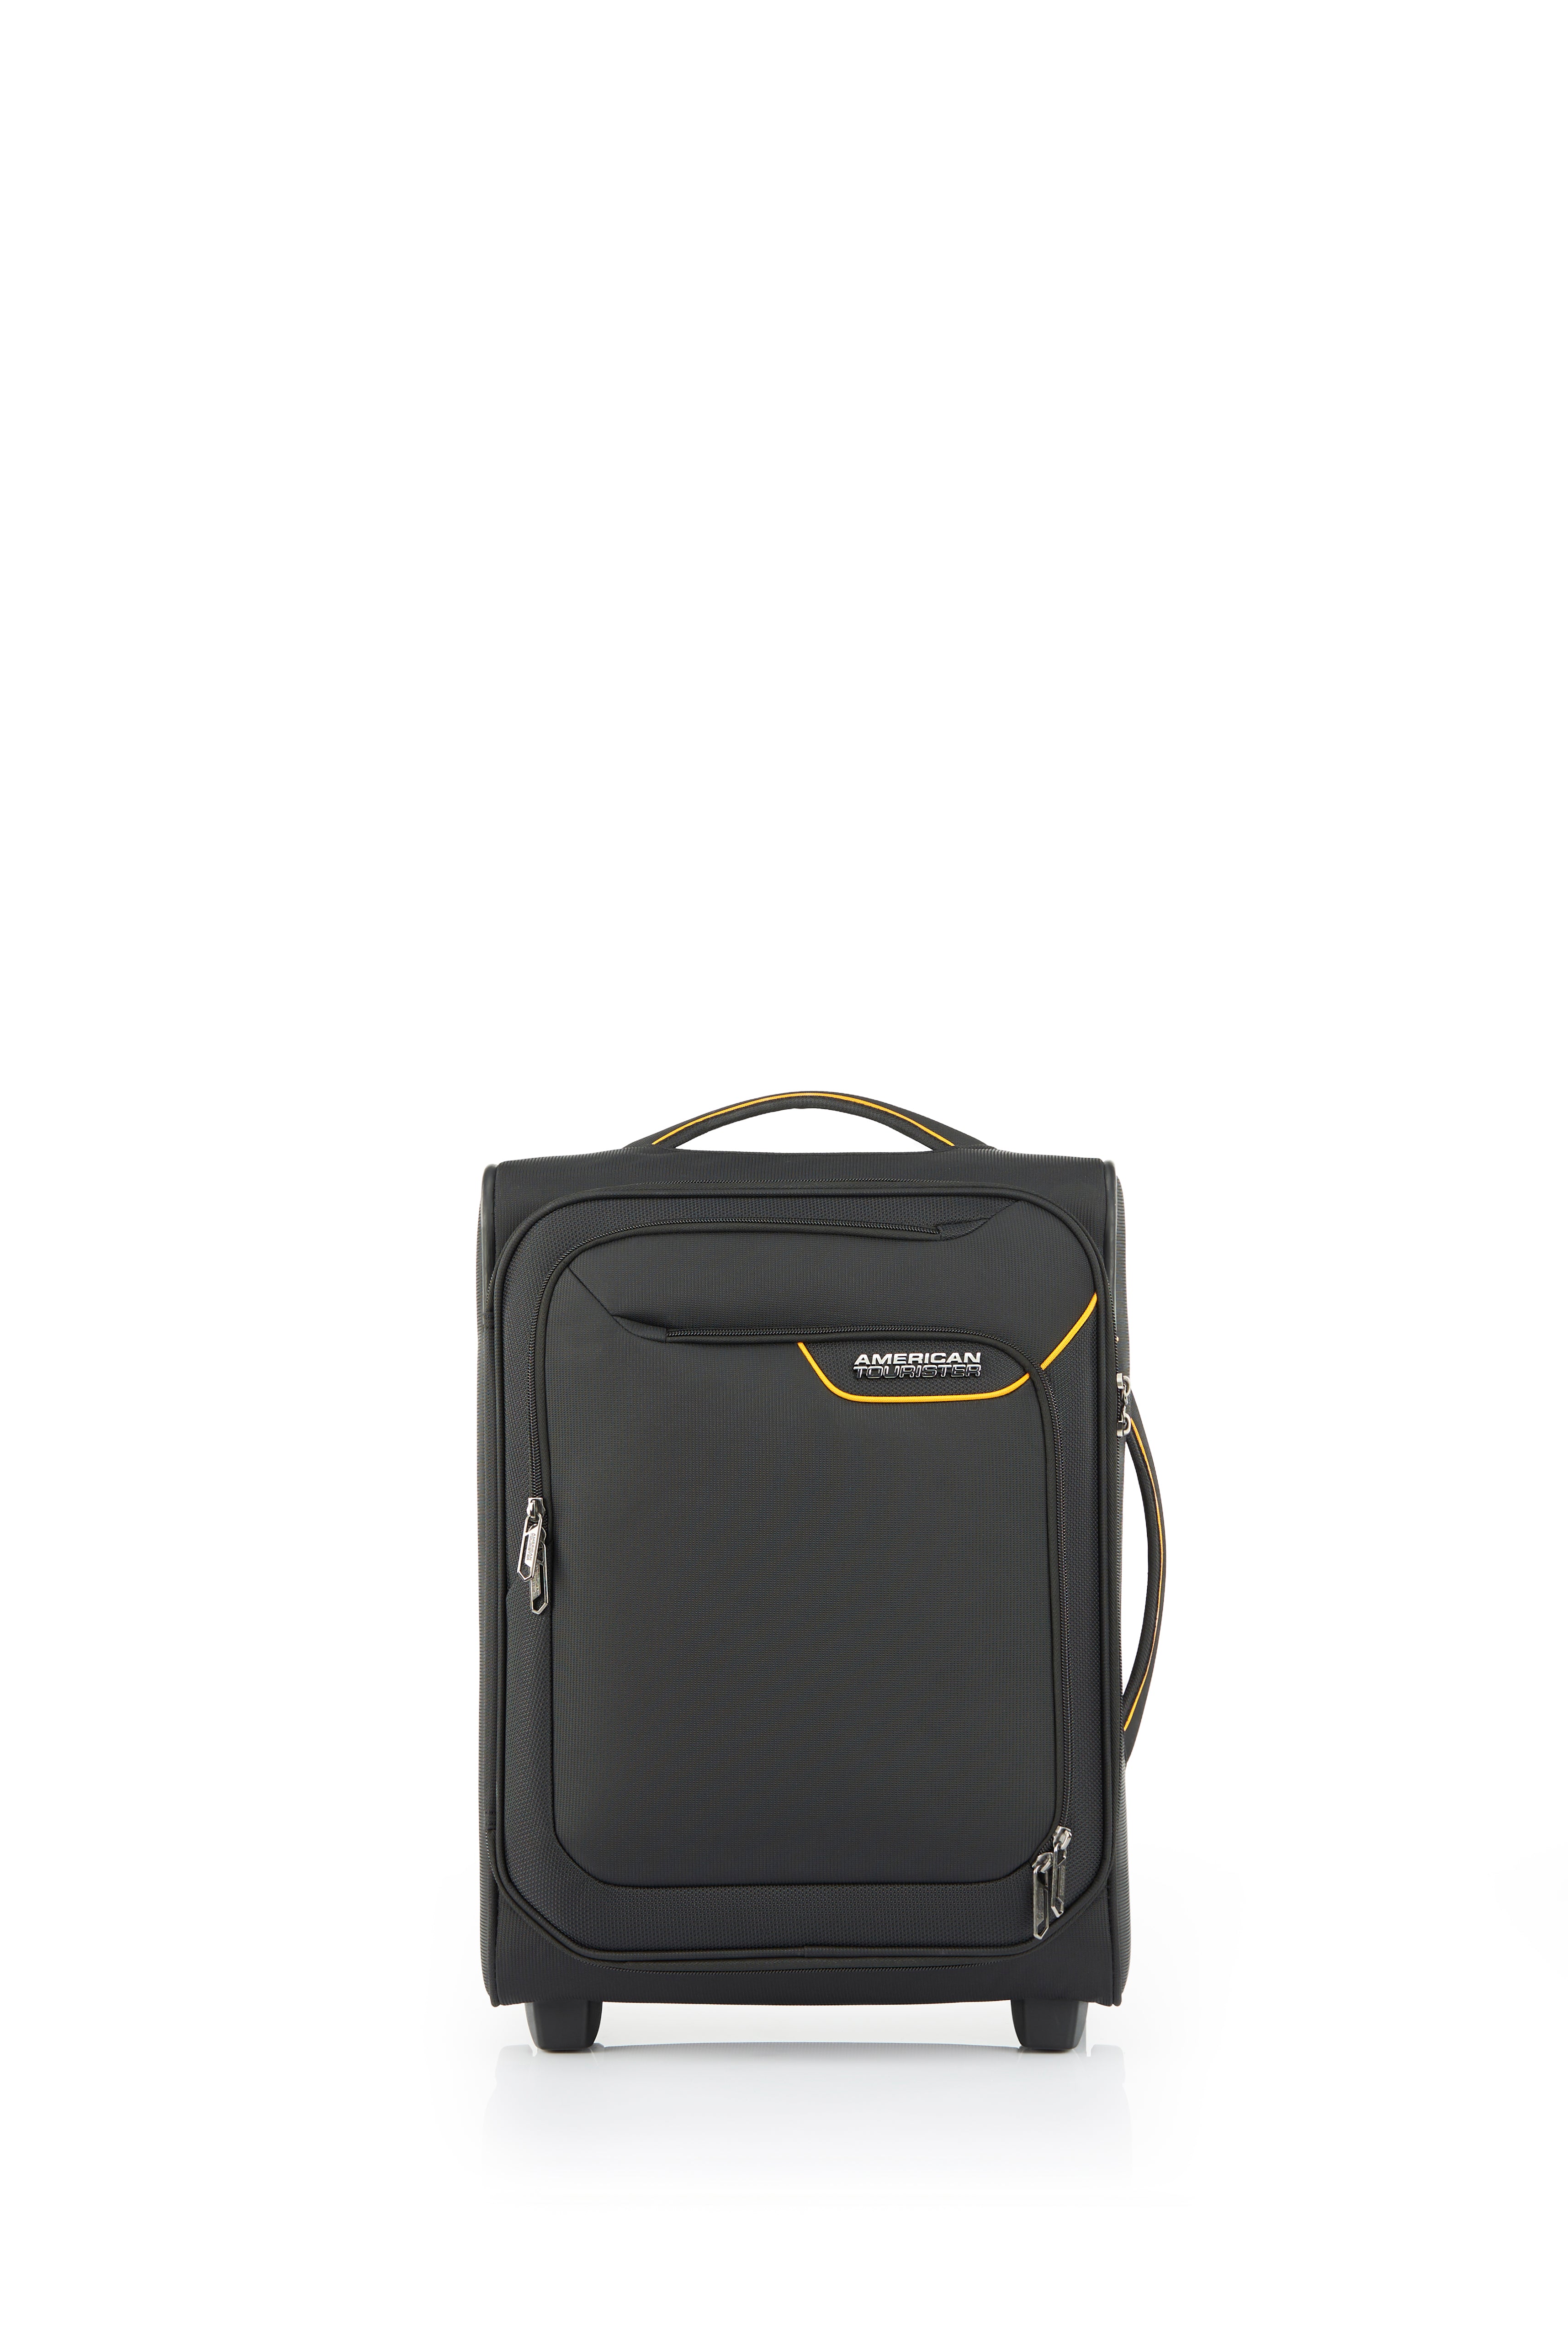 American Tourister - Applite ECO 50cm Small Suitcase - Black/Must-2